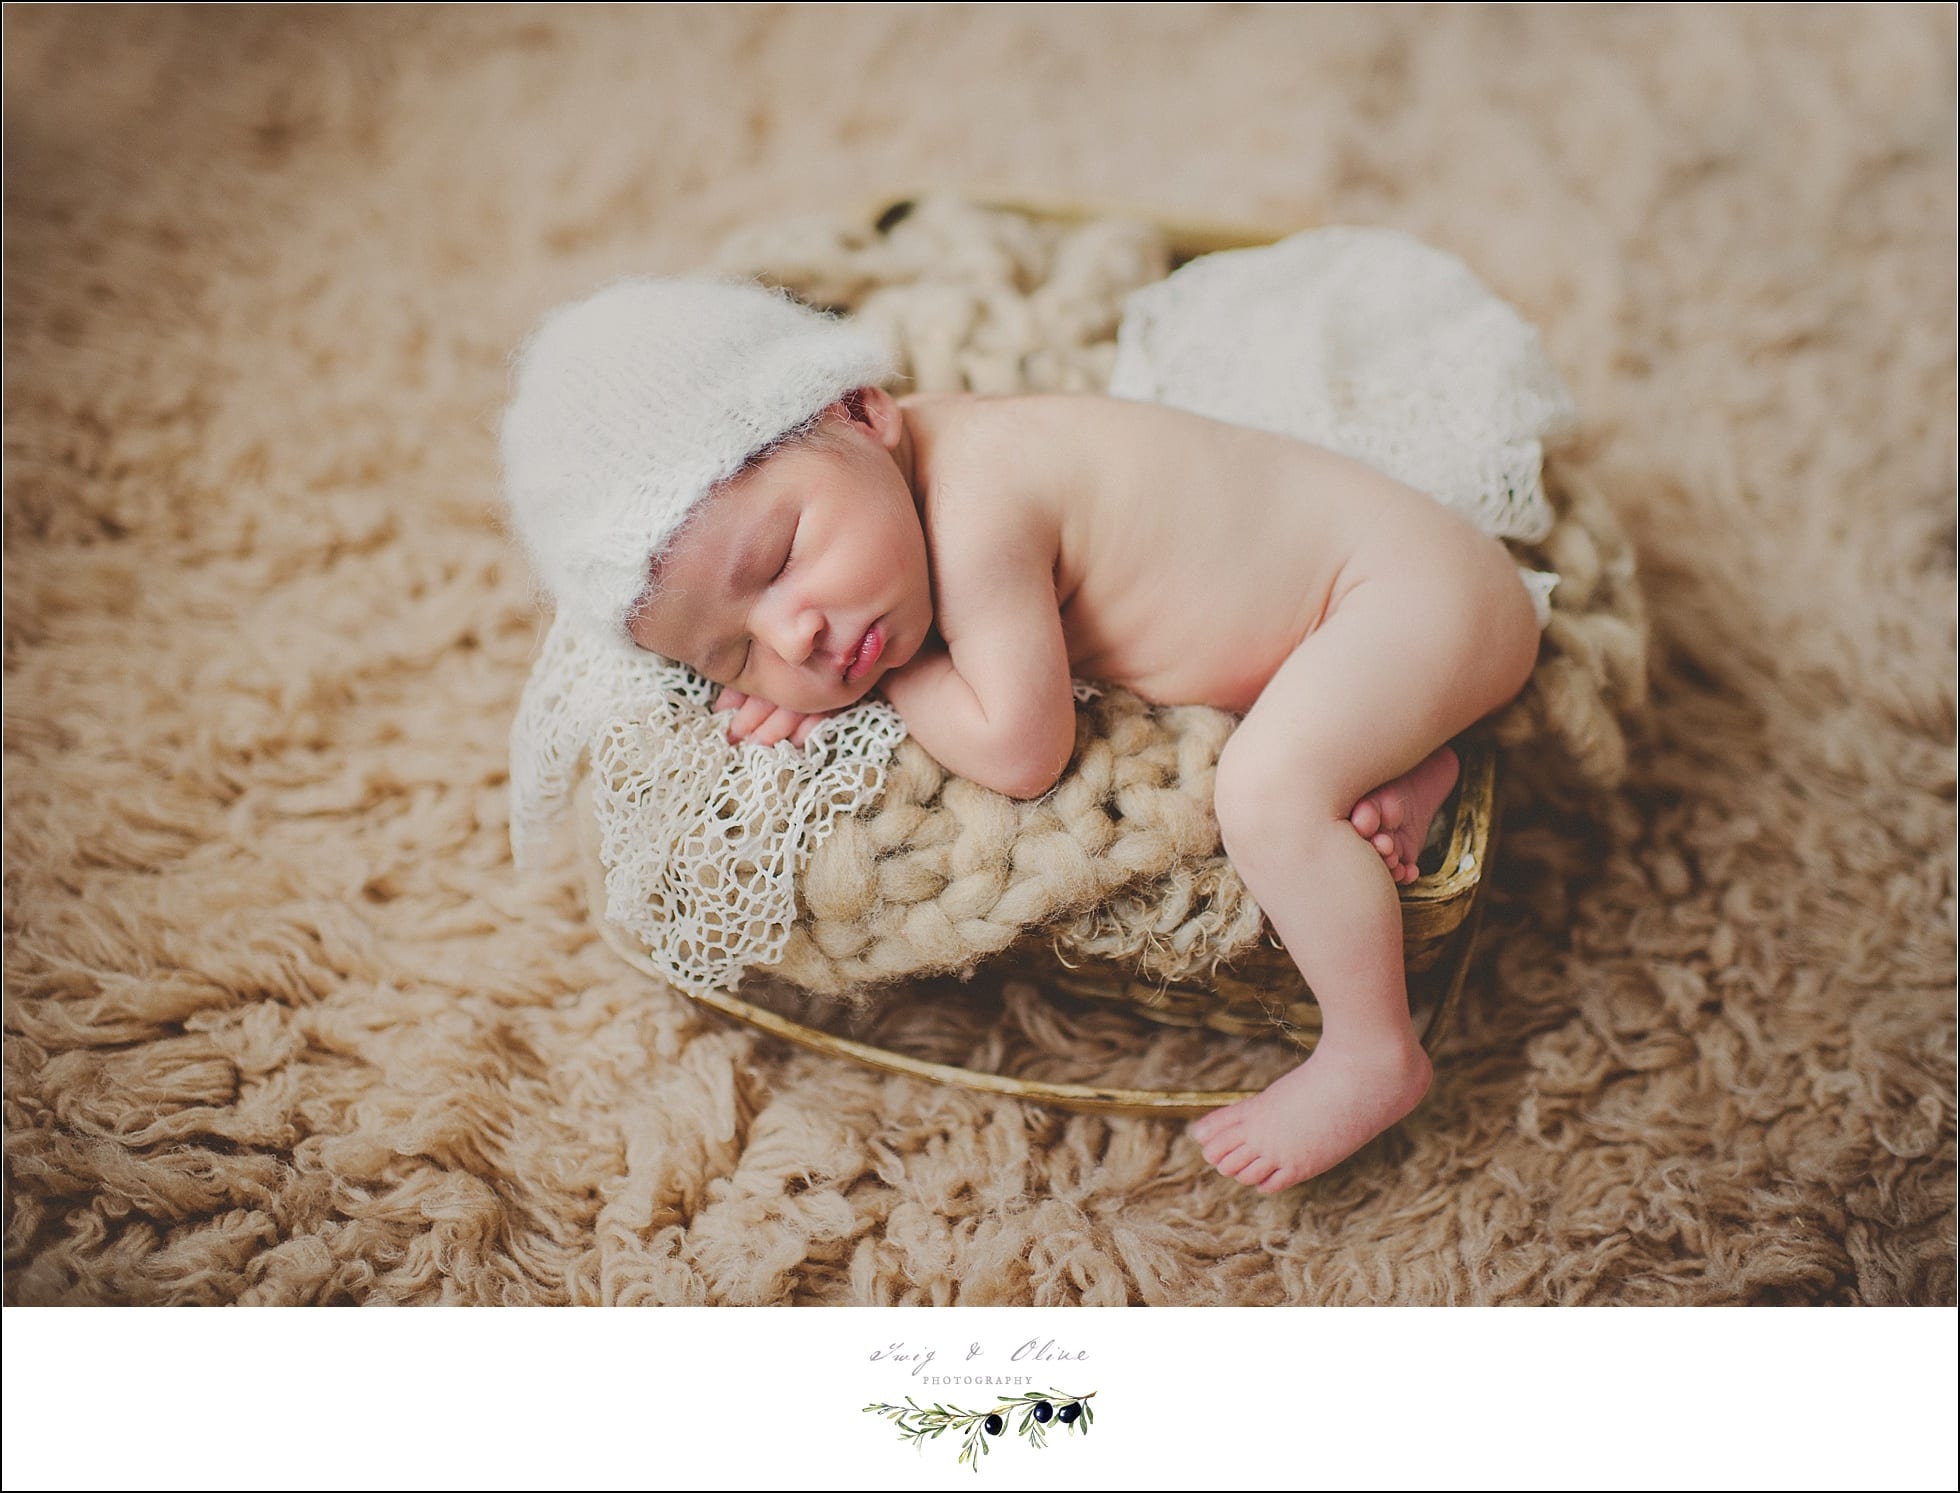 newborn workshop, newborns, Madison, Sun Prairie,  swaddled, bundled, blankets, Twig and Olive newborns, details, little hands, little feet, little ears, hair, bonnets, hair flowers, baskets, beautiful moms, proud dads, happy families, newborn sessions, family sessions, Dane county area photography sessions, TOP